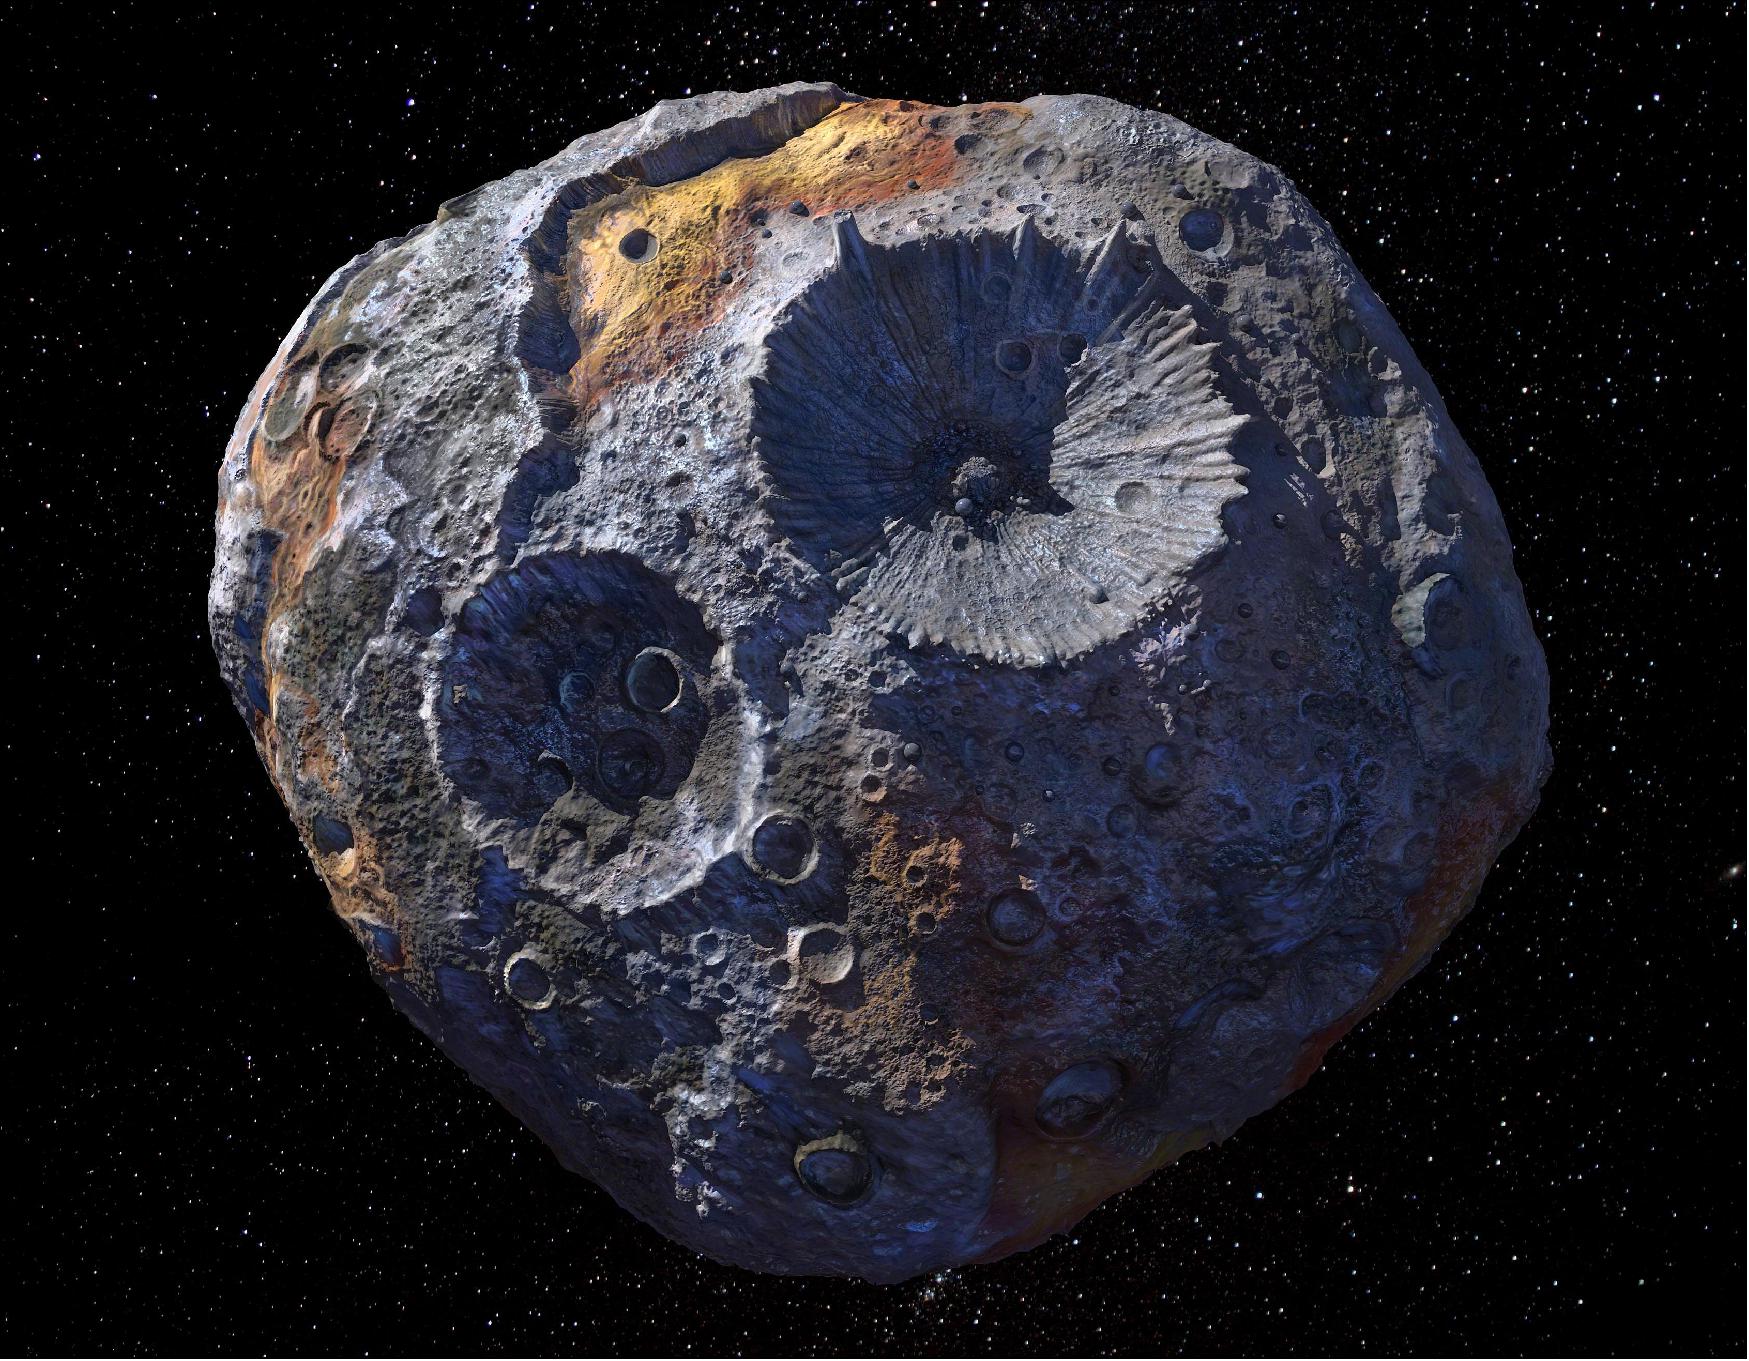 Figure 1: This artist's concept depicts the 140-mile-wide (226 km wide) asteroid Psyche, which lies in the main asteroid belt between Mars and Jupiter. Psyche is the focal point of NASA's mission of the same name. The Psyche spacecraft is set to launch in August 2022 and arrive at the asteroid in 2026, where it will orbit for 21 months and investigate its composition (image credit: NASA/JPL-Caltech, Peter Rubin) 4)